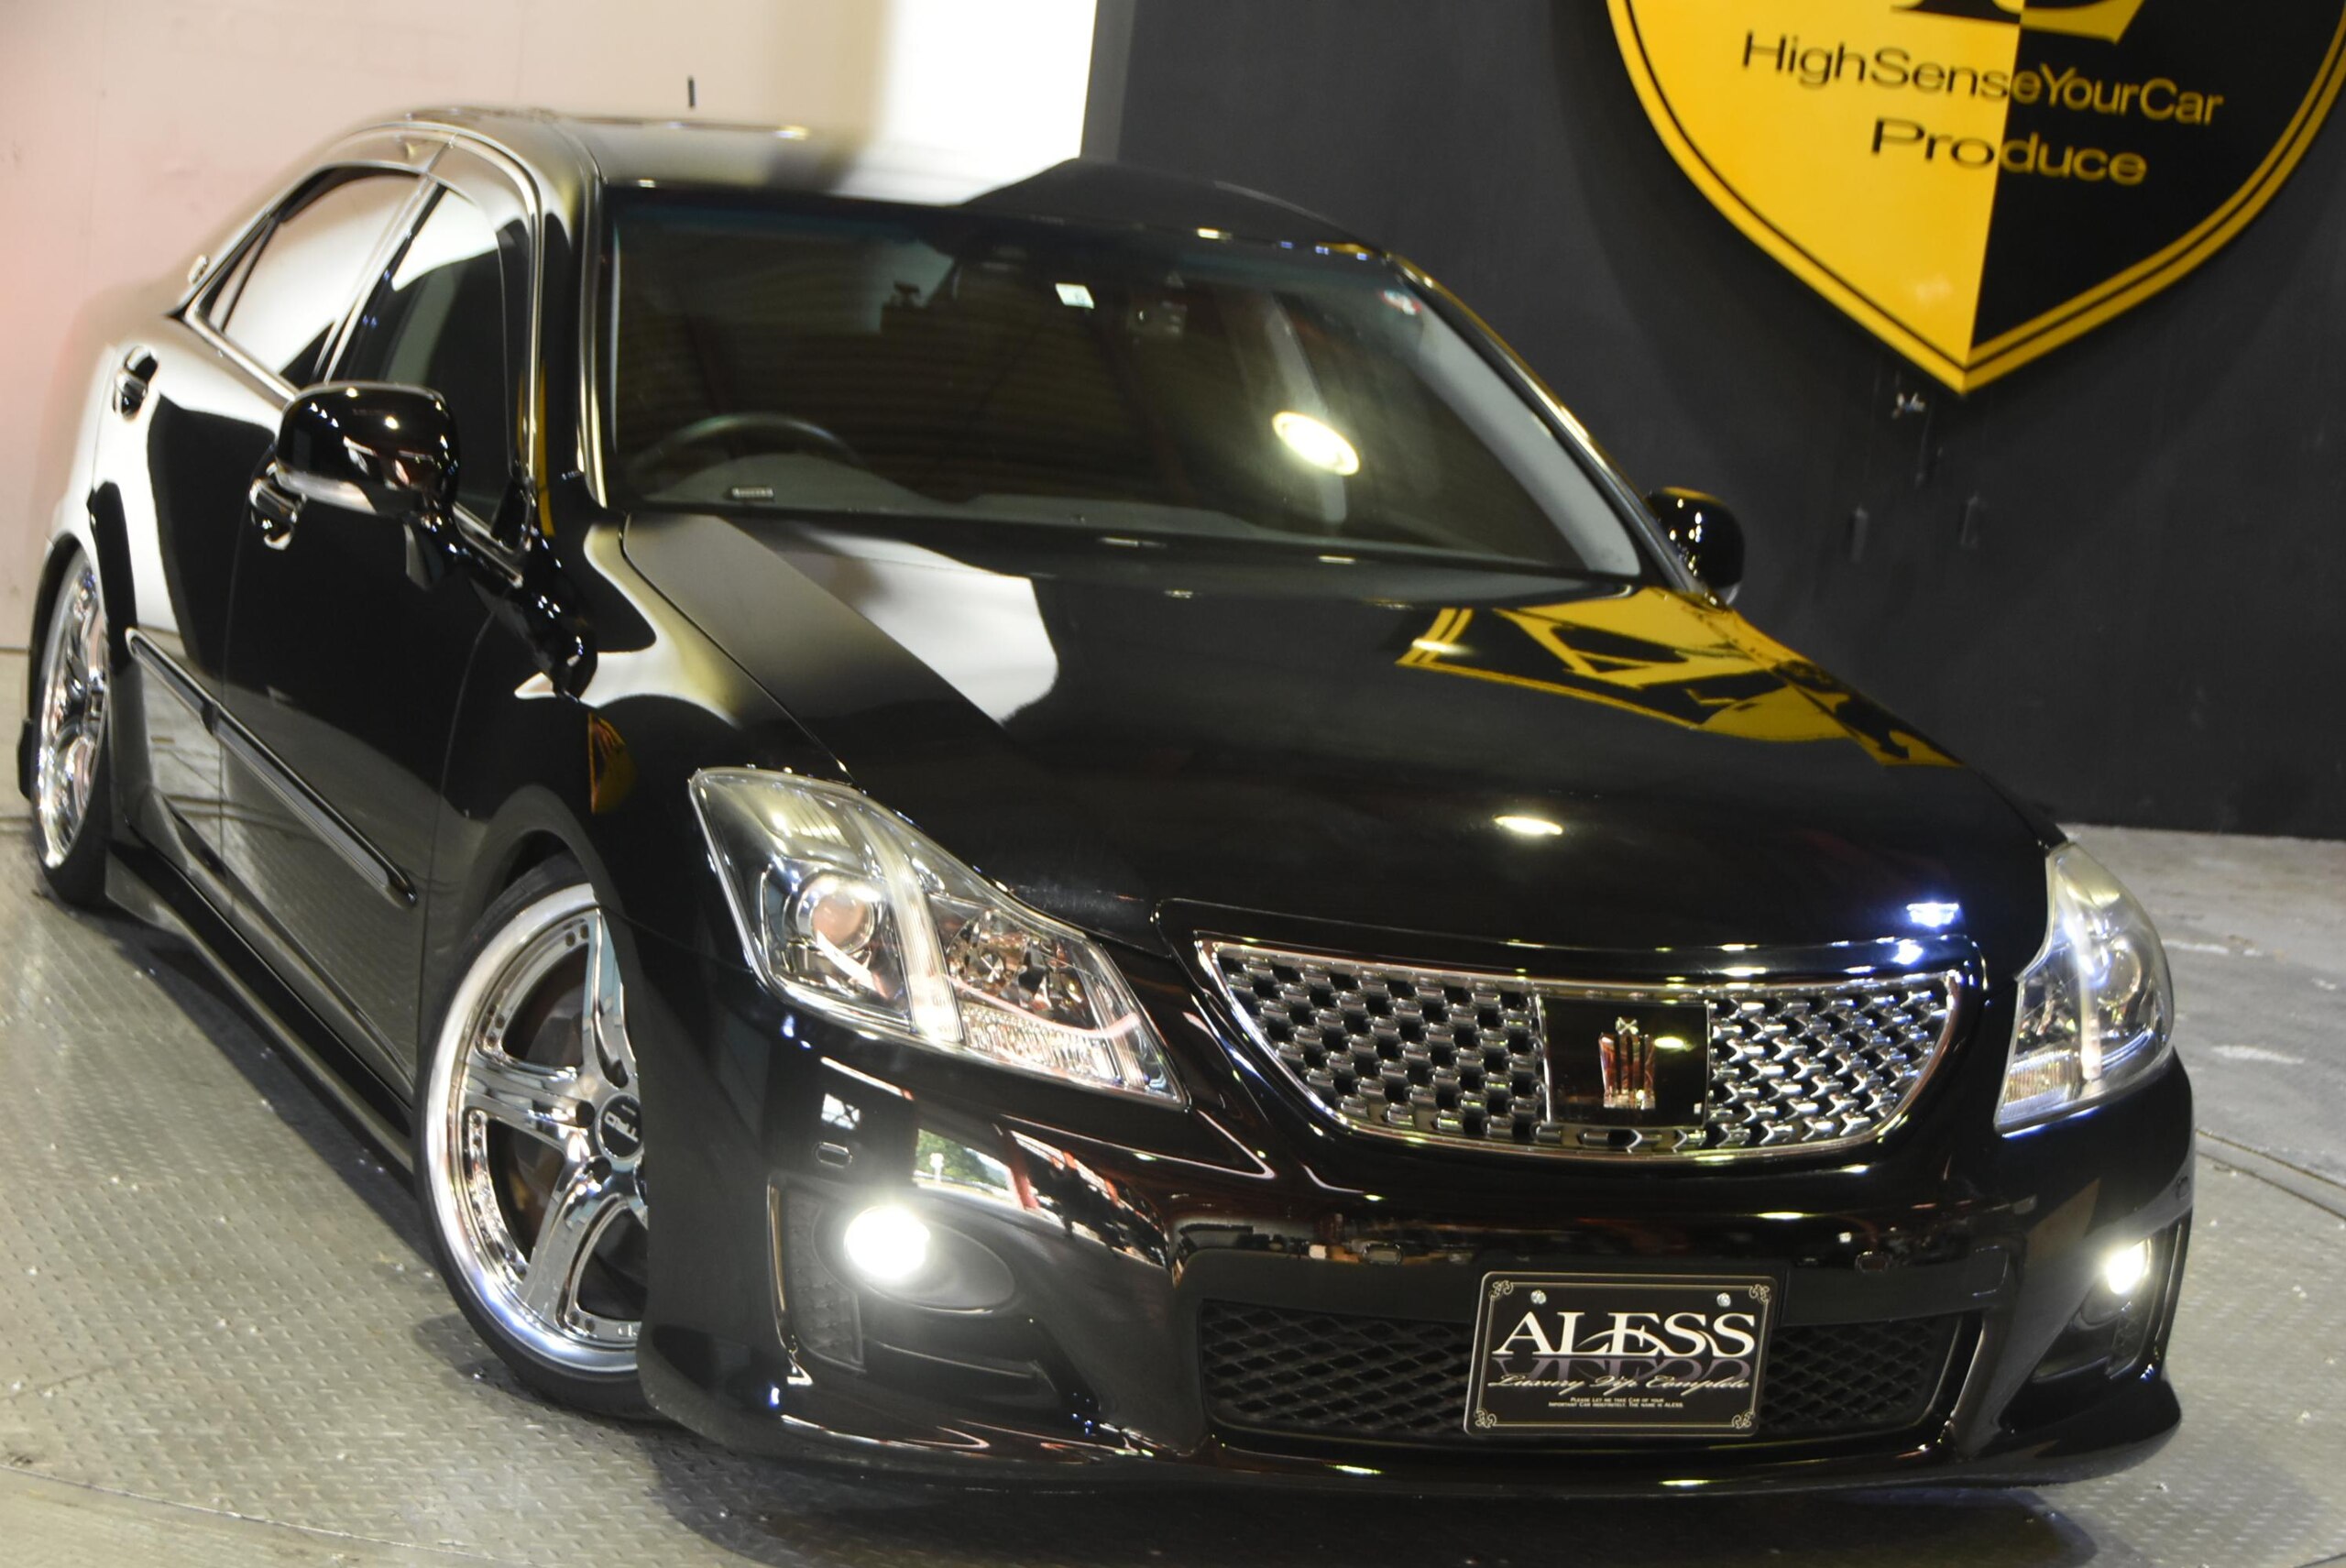 Used TOYOTA CROWN ATHLETE SERIES 2008 CFJ8817496 in good condition 